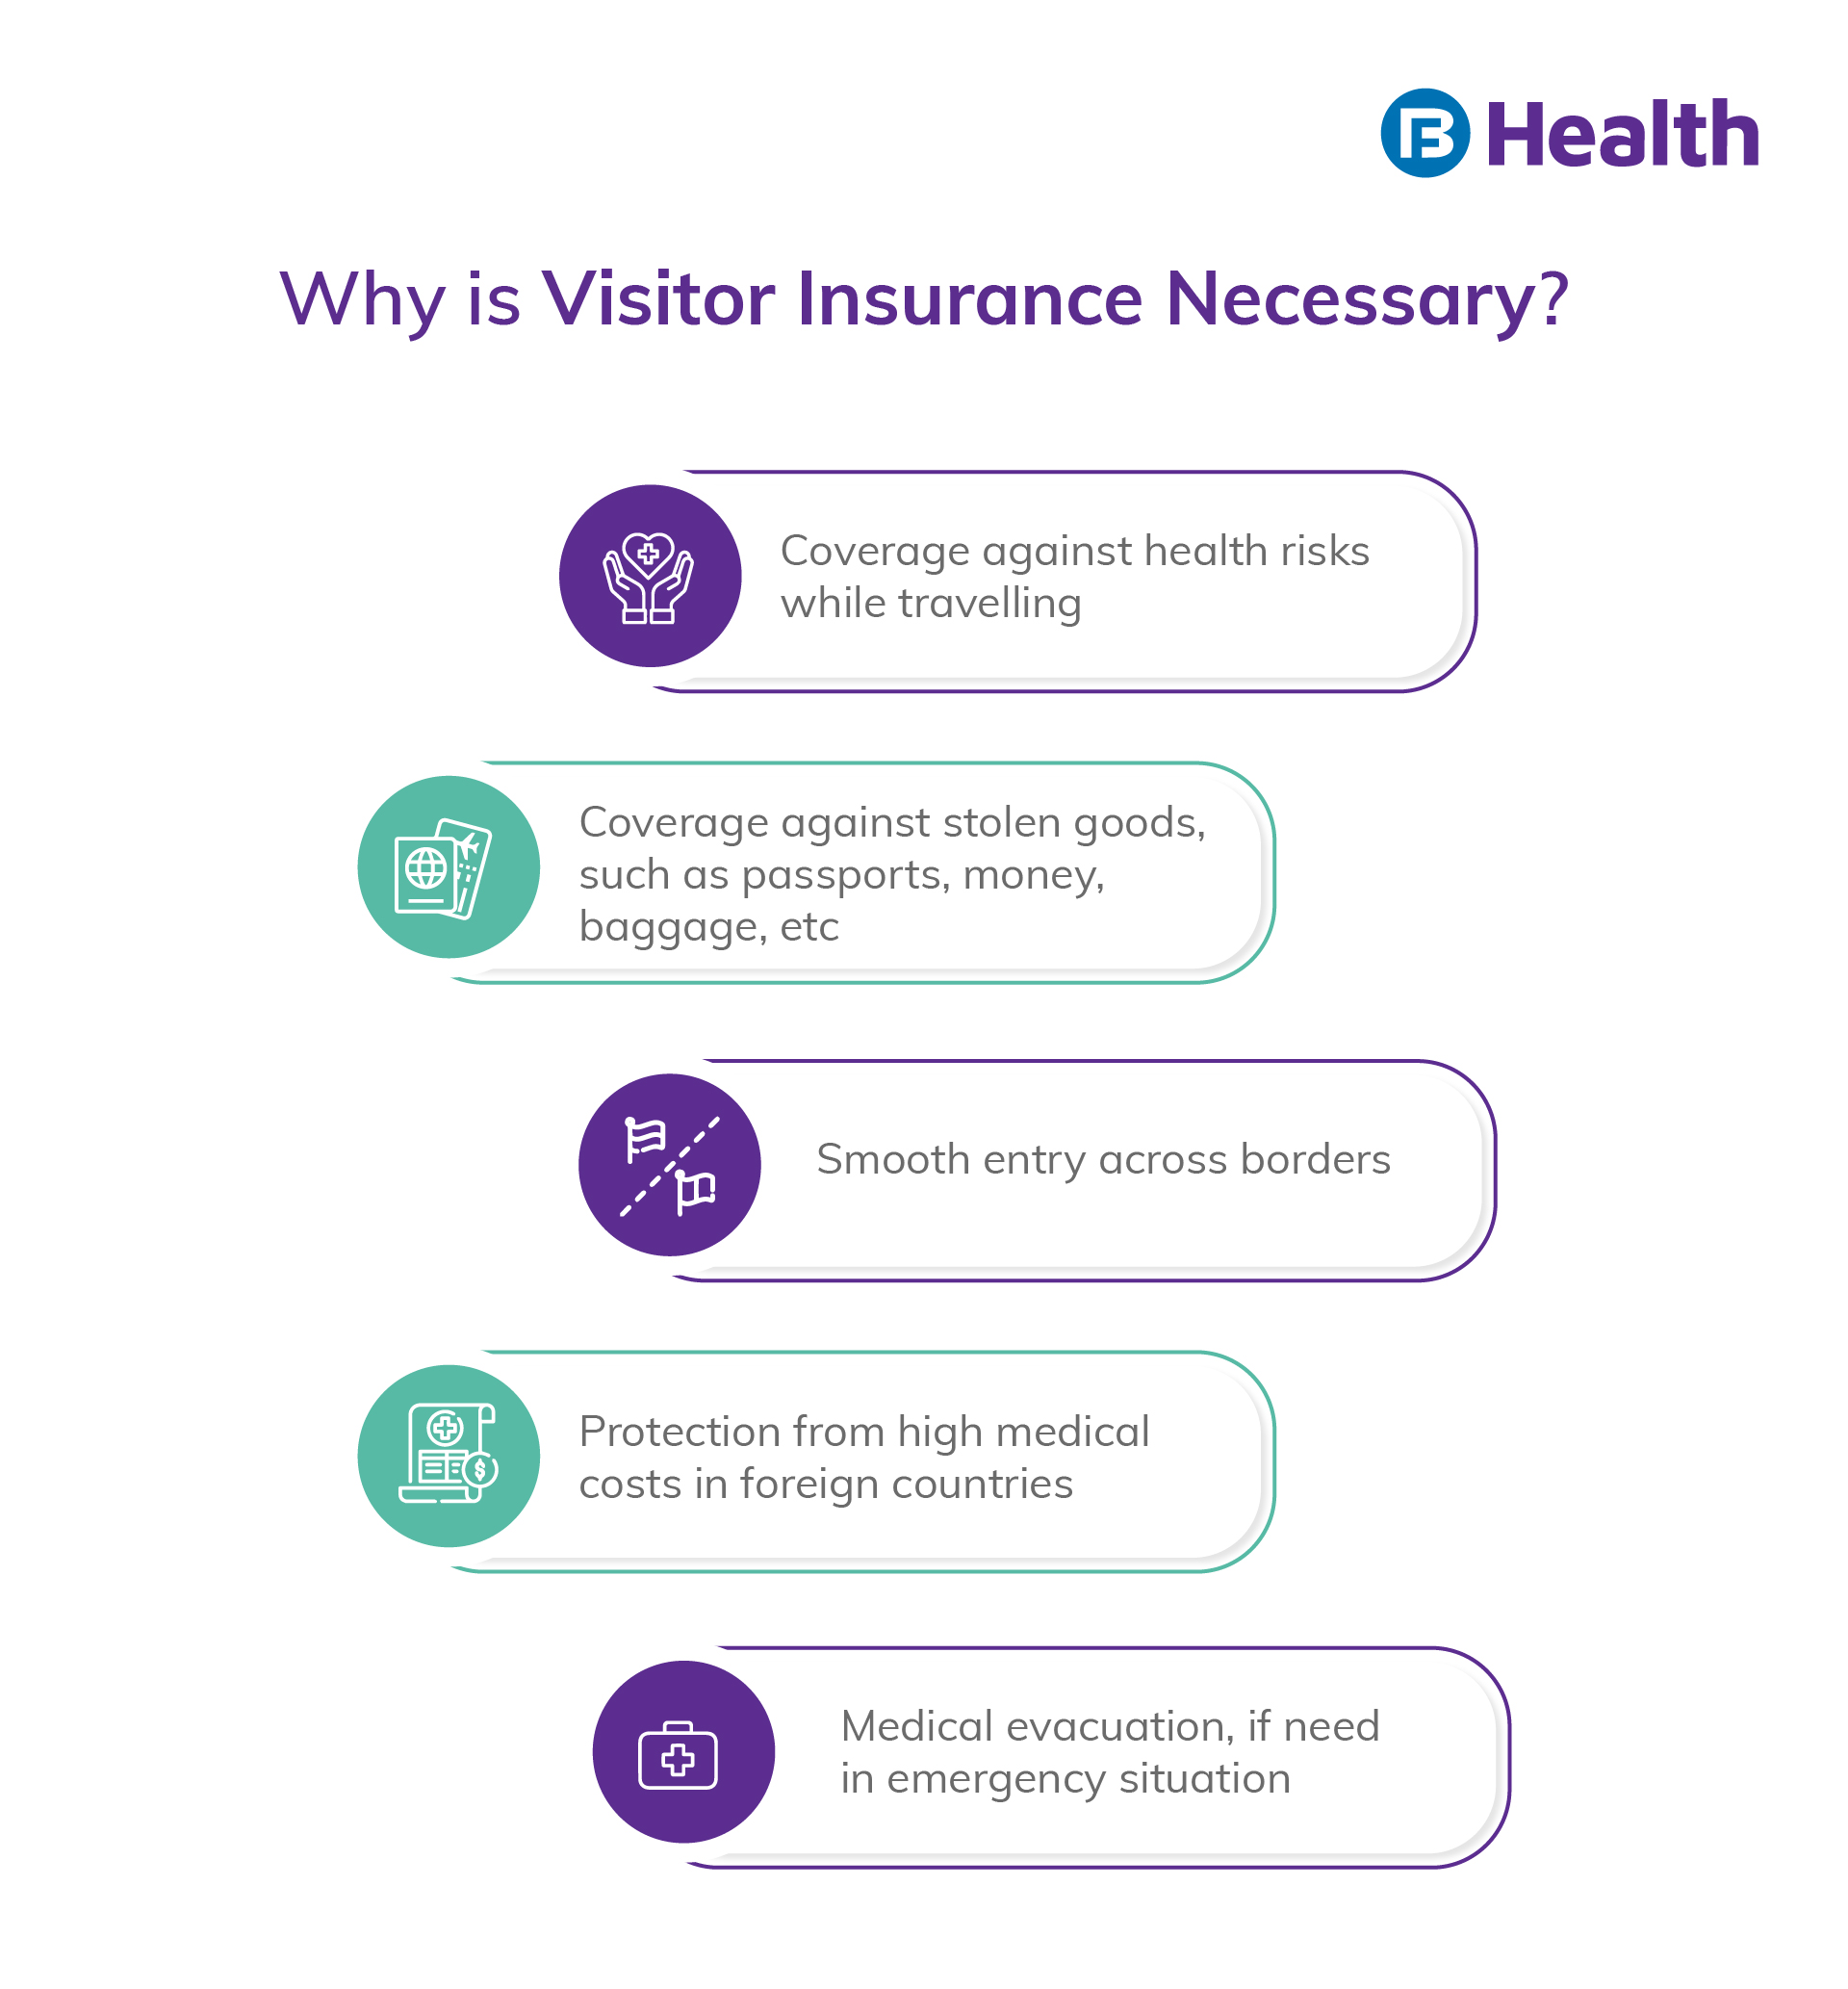 Visitor Insurance importance